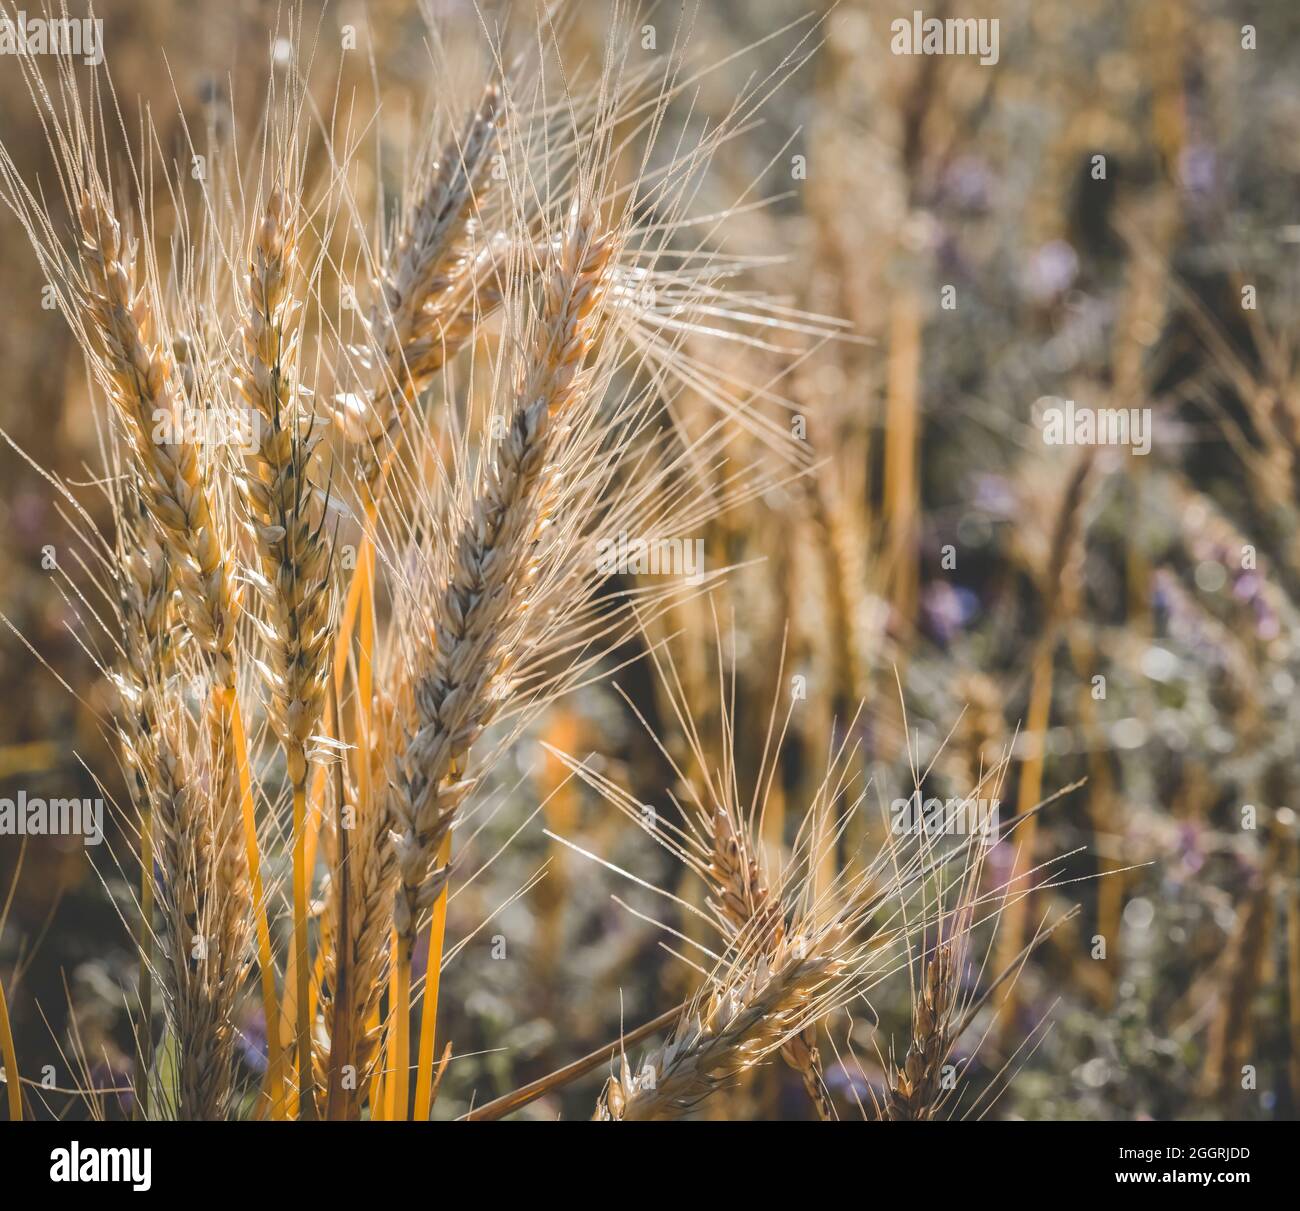 Field sown with wheat ready to harvest, La Pampa Province , Patagonia , Argentina. Stock Photo